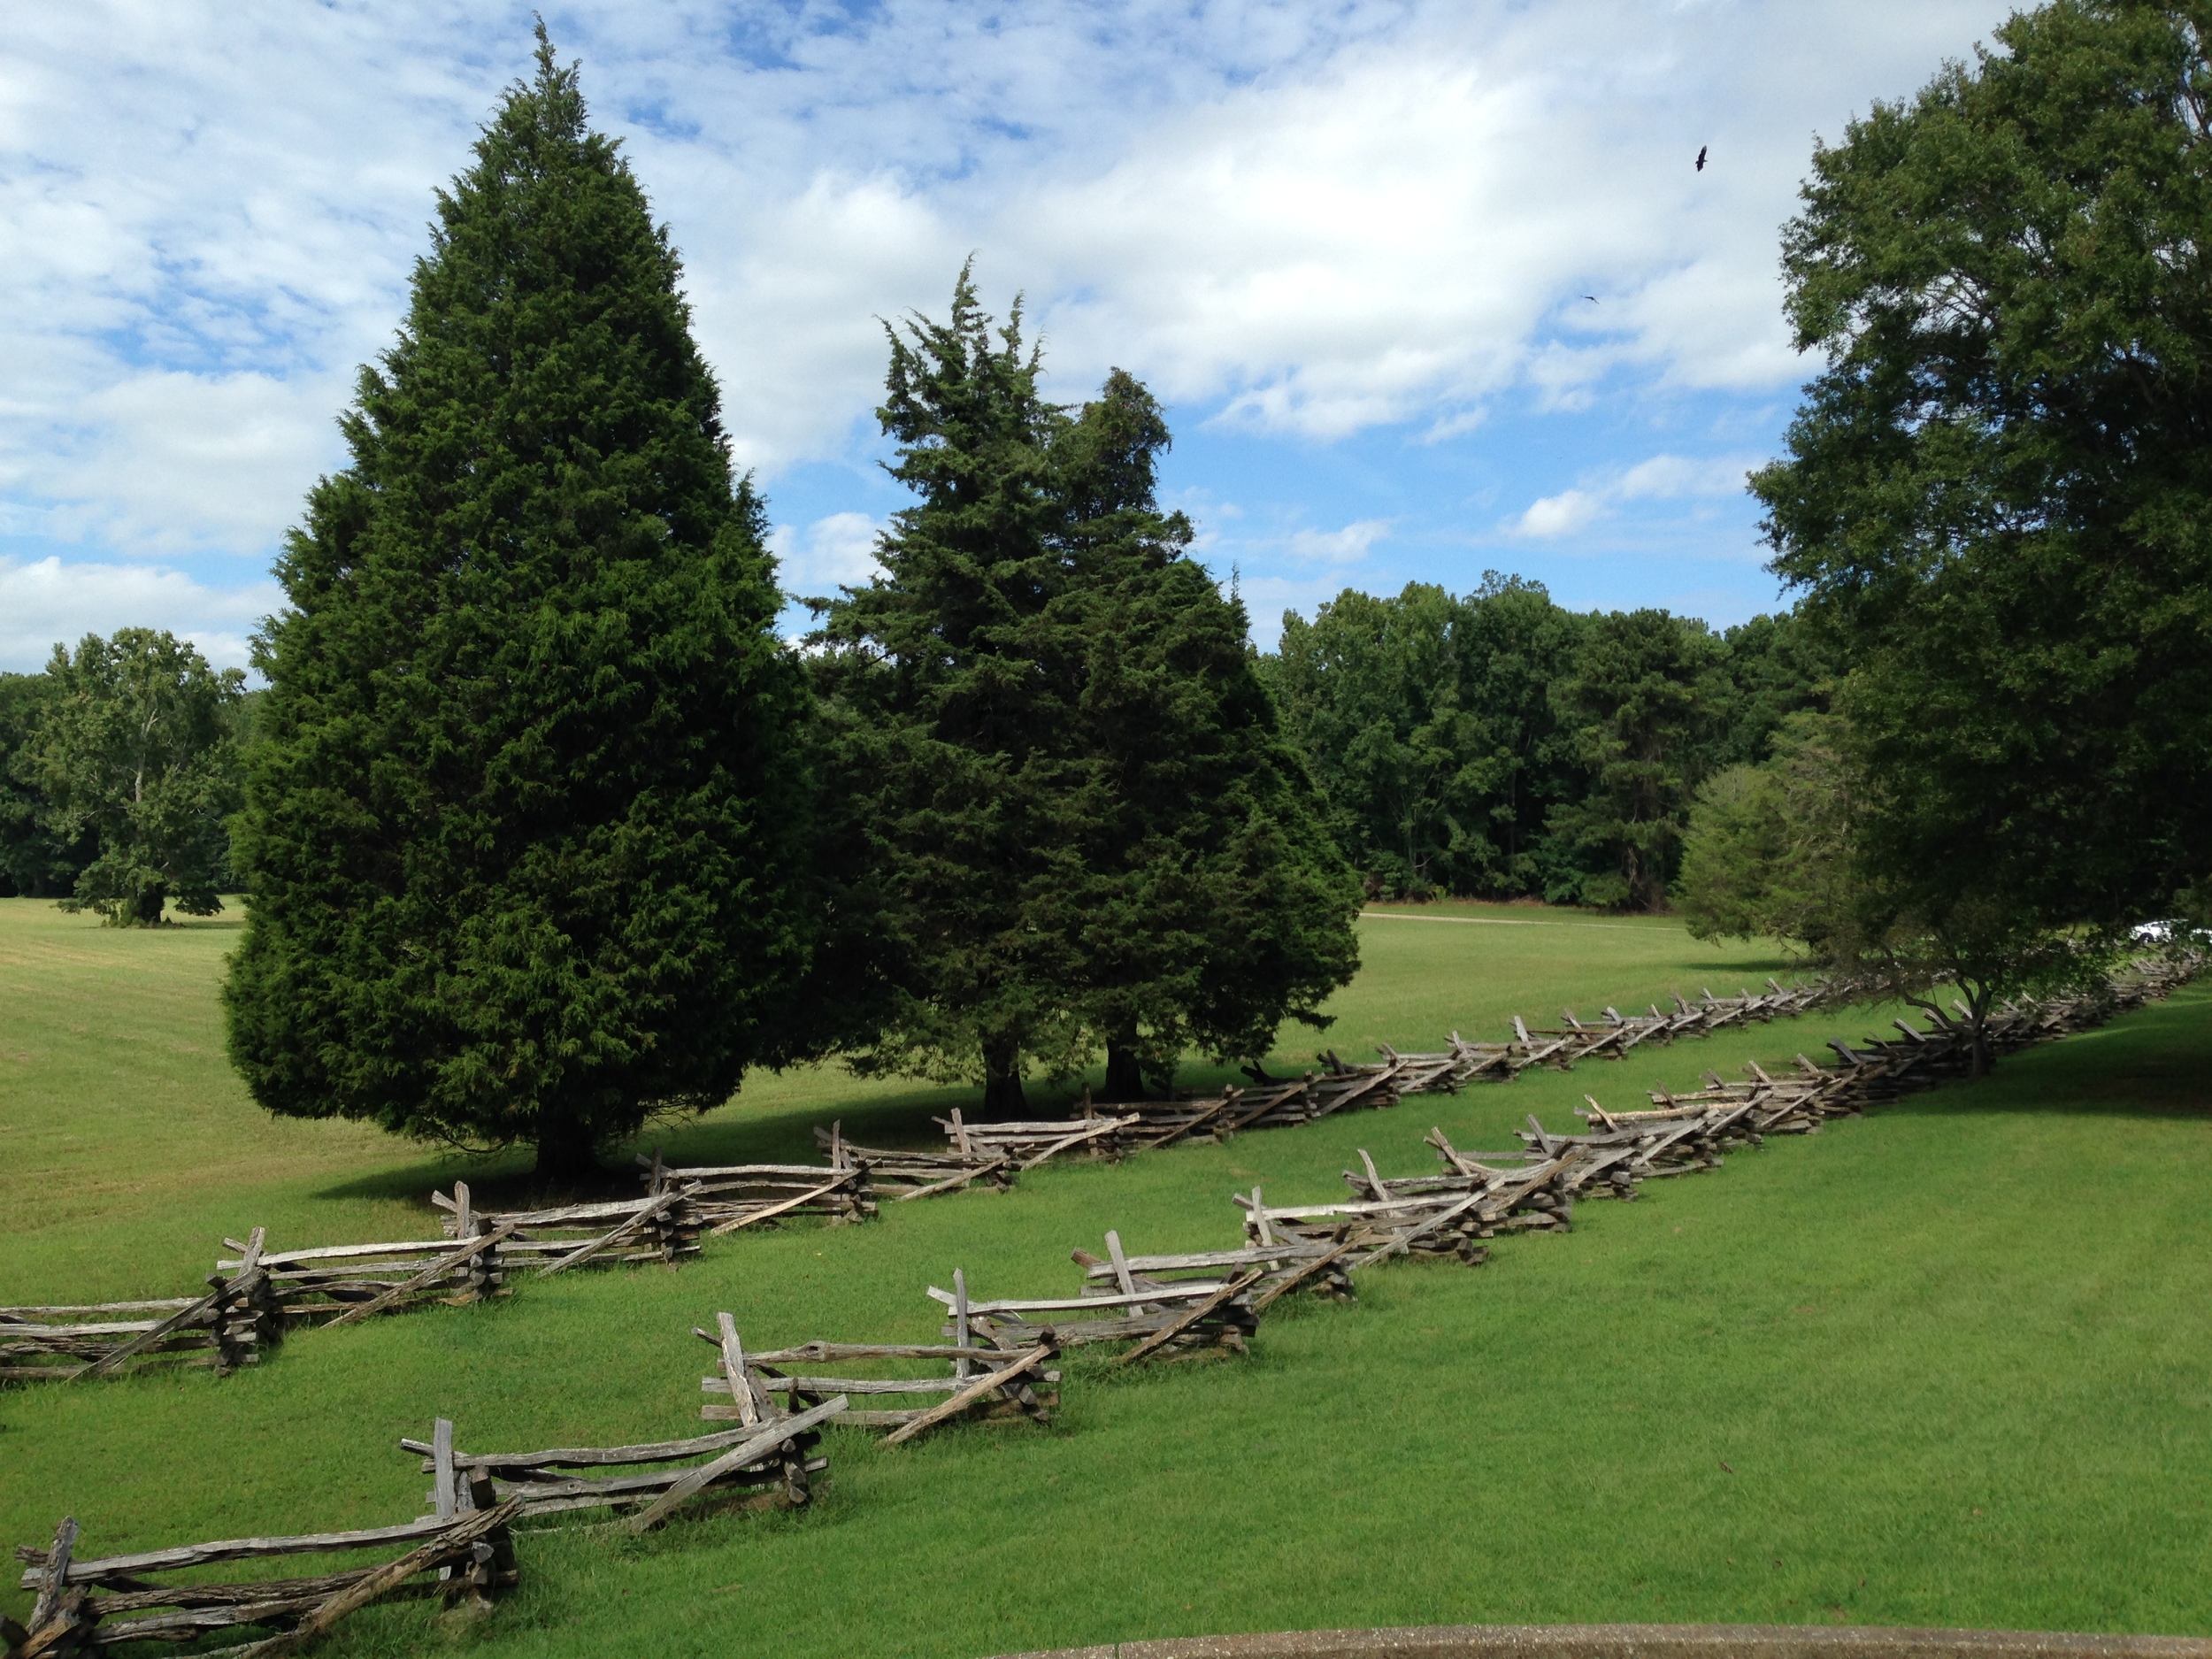  The surrender field. &nbsp;The fence line marks the position in which the victorious French and American troops would have stood while the defeated British passed between enroute to surrendering their weapons. 